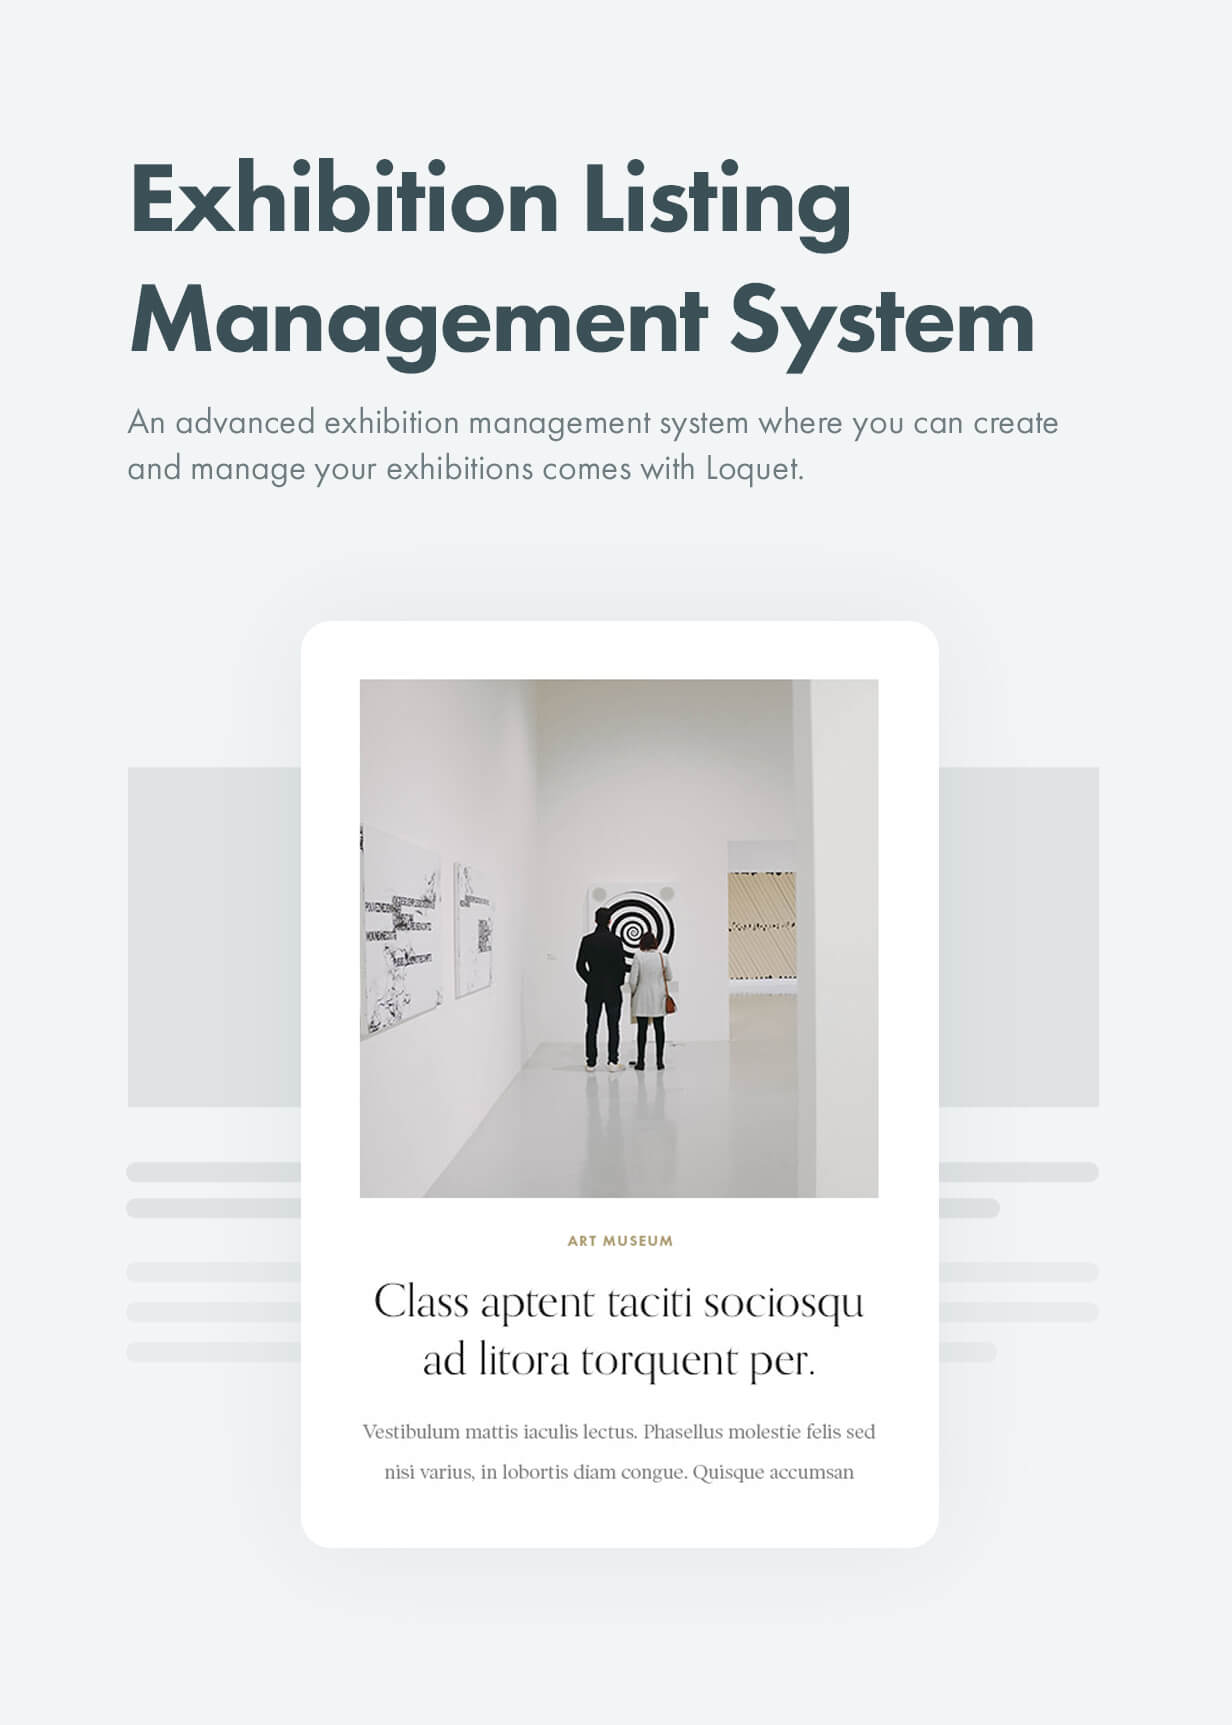 Exhibition listing management system